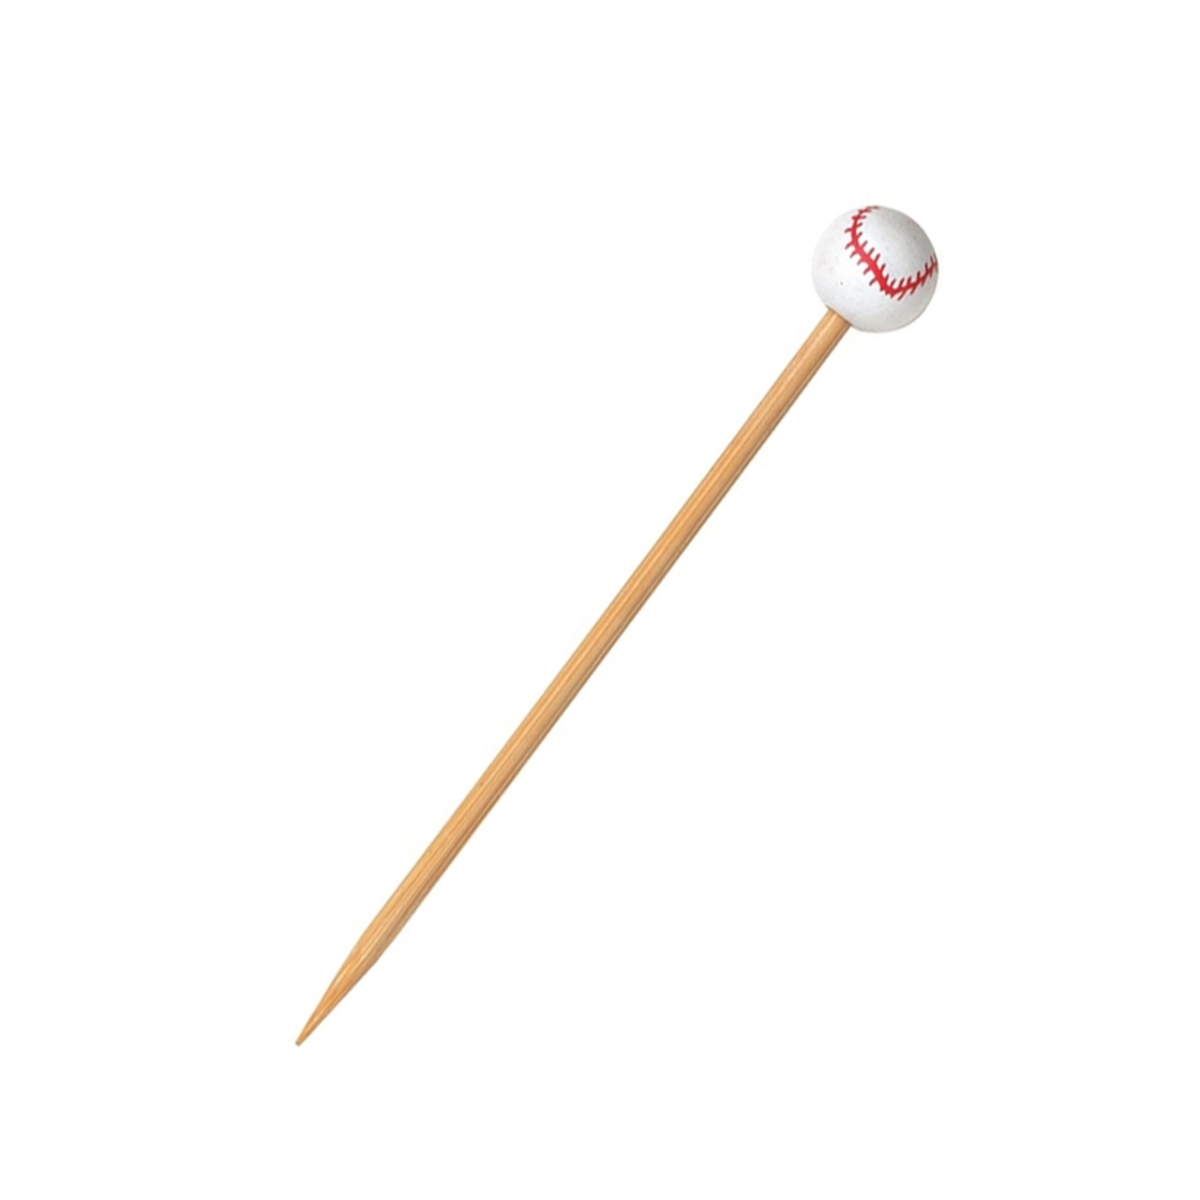 Picture of Packnwood 210BBASB12 4.7 in. Bamboo Baseball Skewers - 1000 Piece